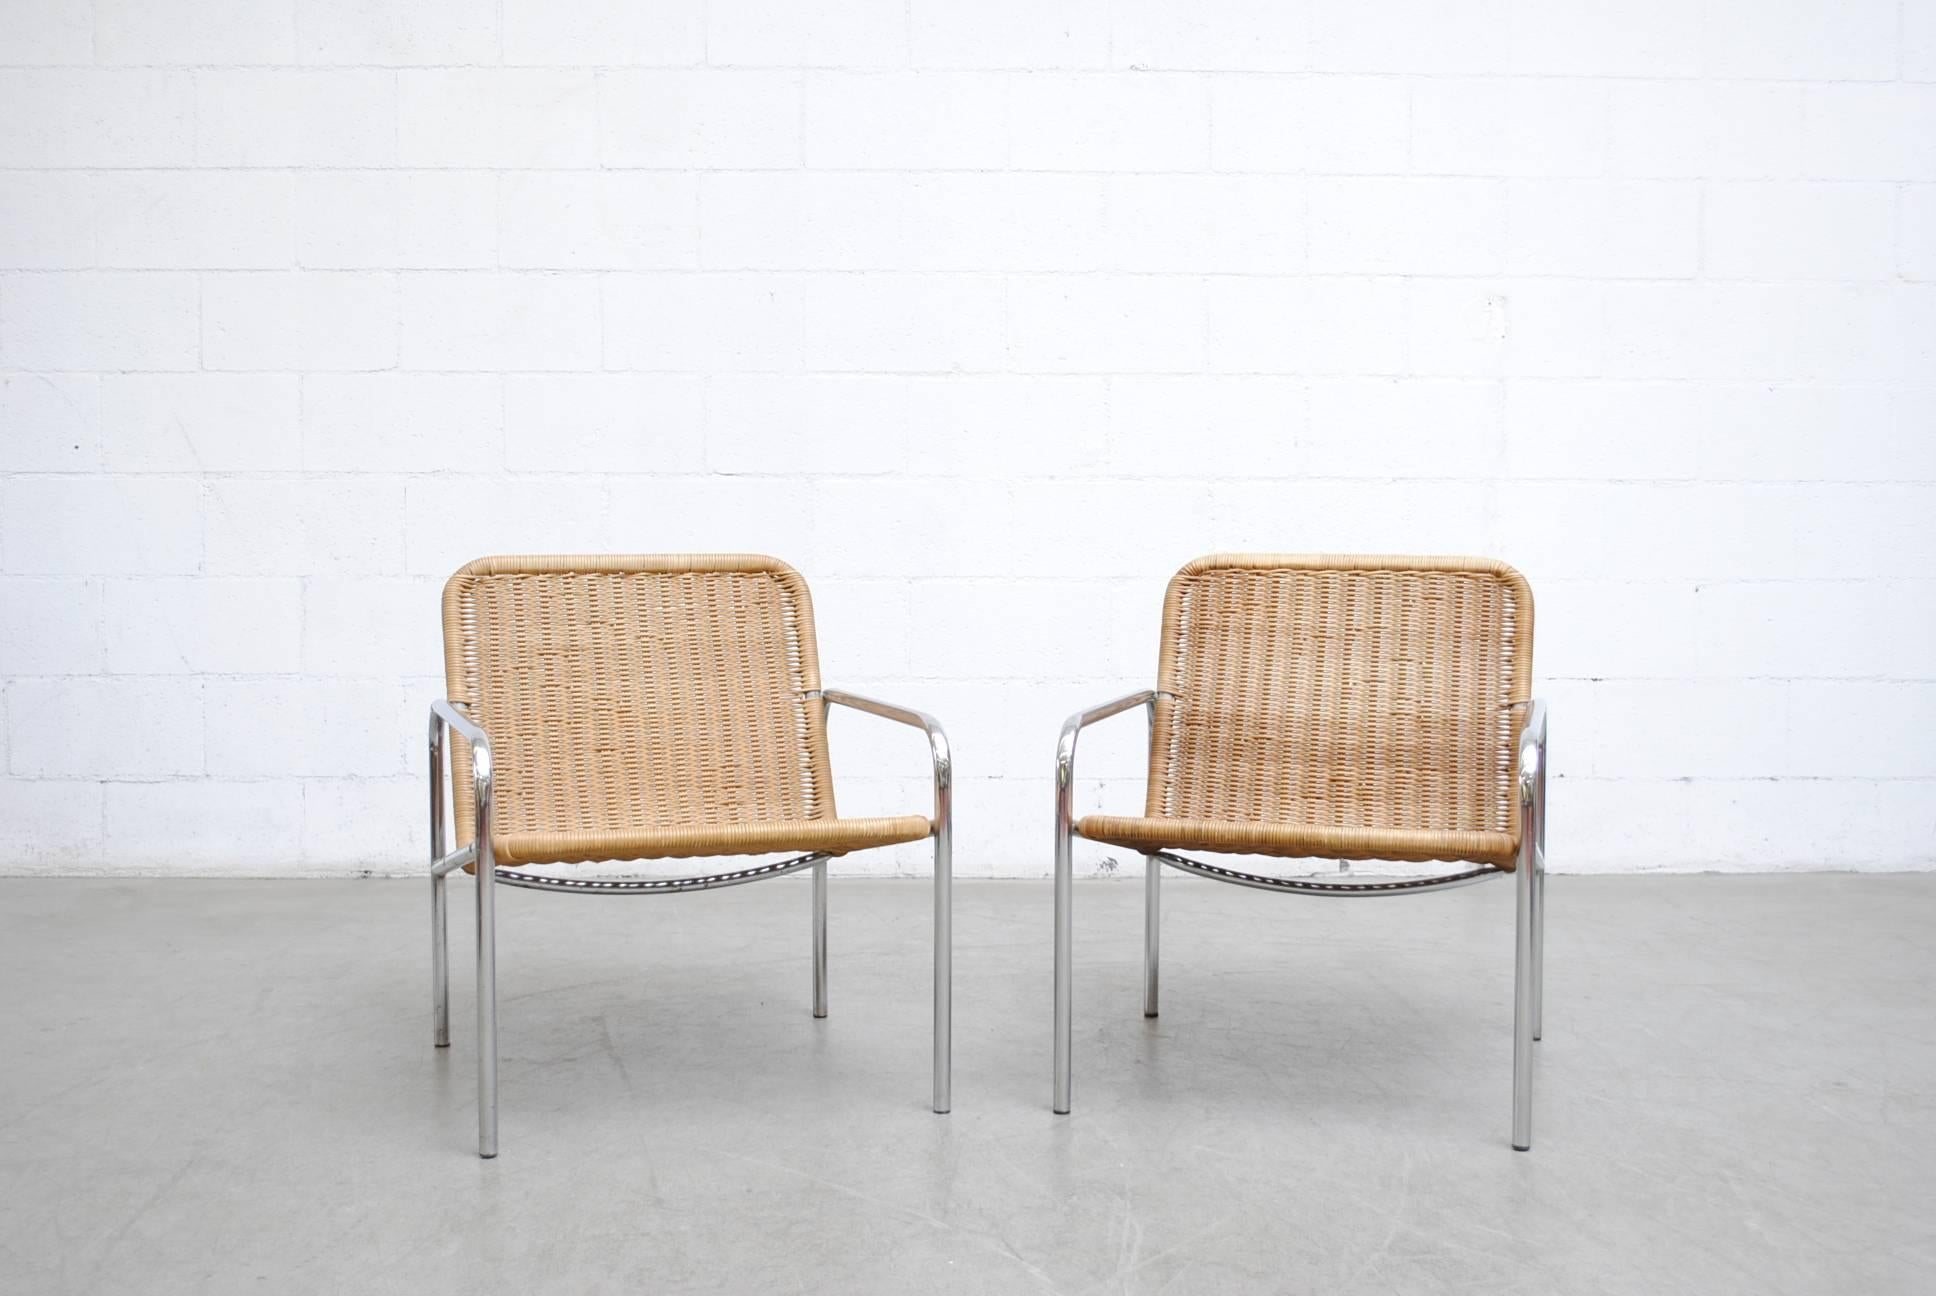 Low and handsome pair of chrome and woven rattan lounge chairs, possibly part of Visser's Osaka series. In good original condition with visible wear consistent with its age and usage.